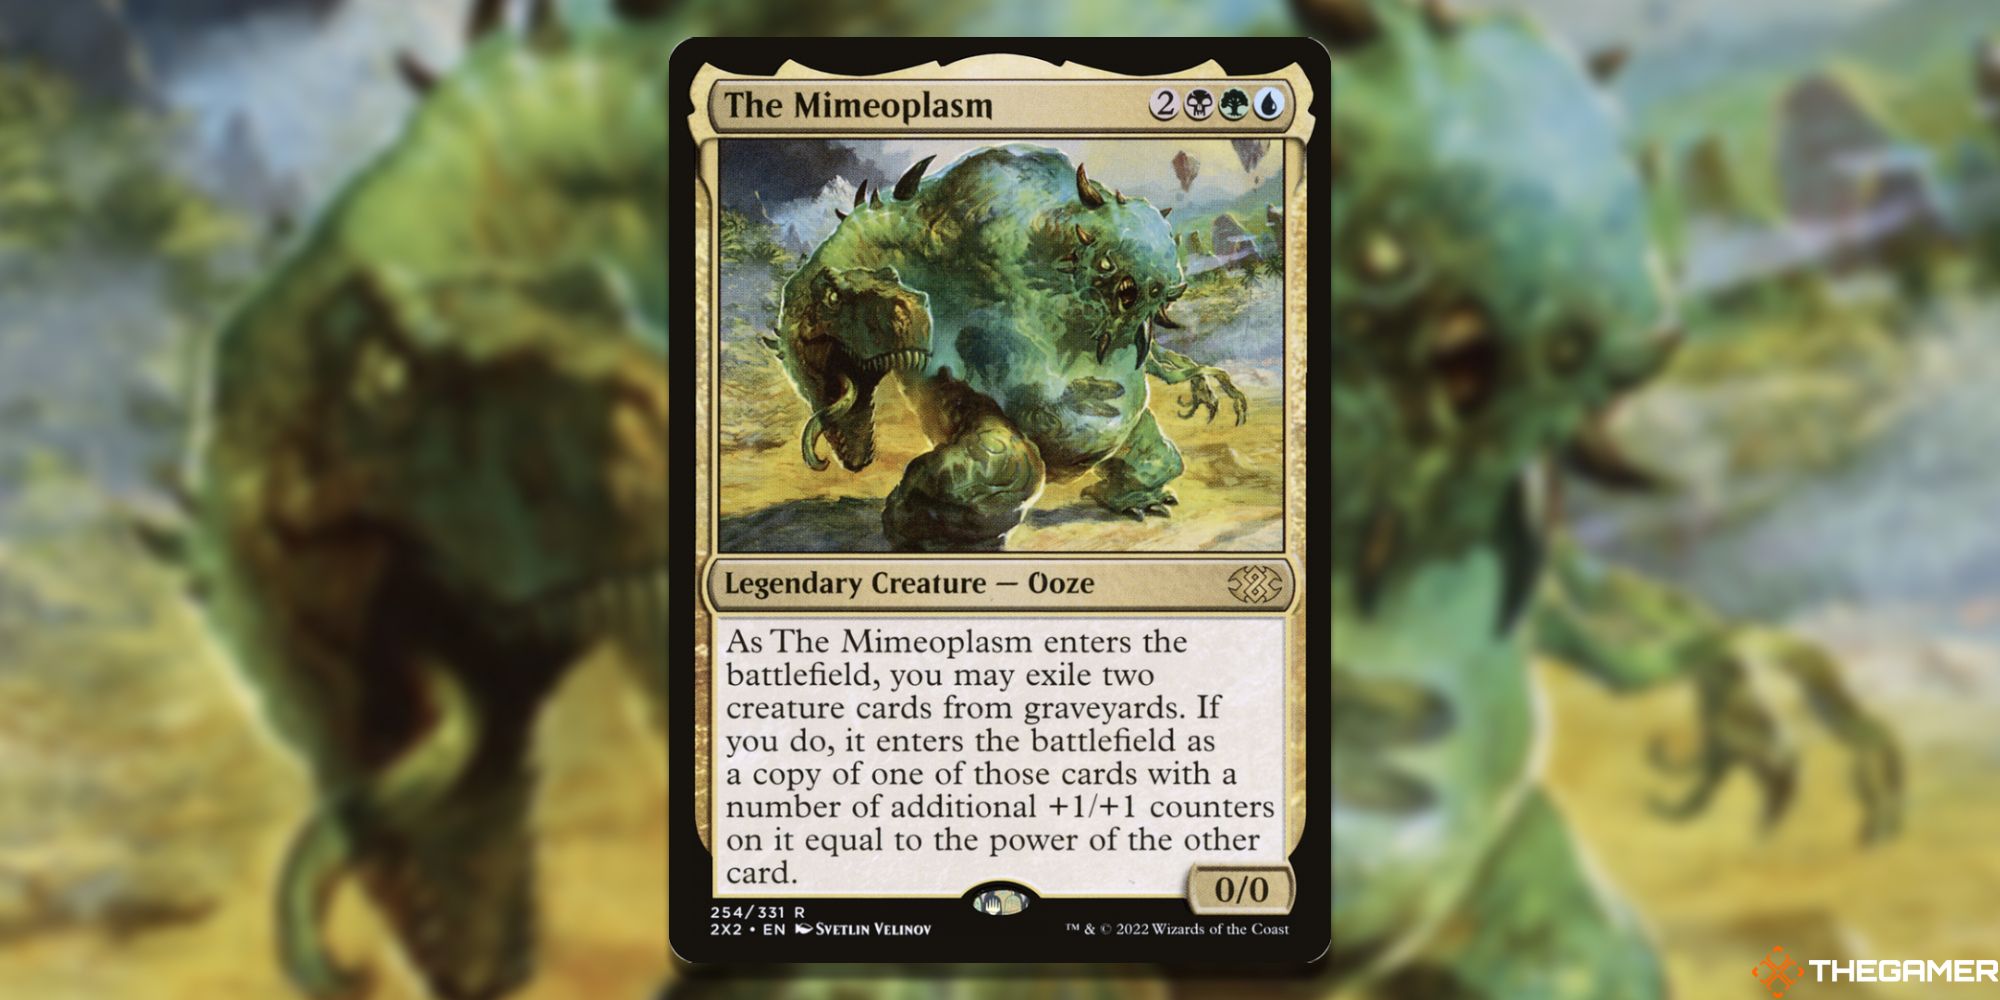 Image of the The Mimeoplasm card in Magic: The Gathering, with art by Svetlin Velinov